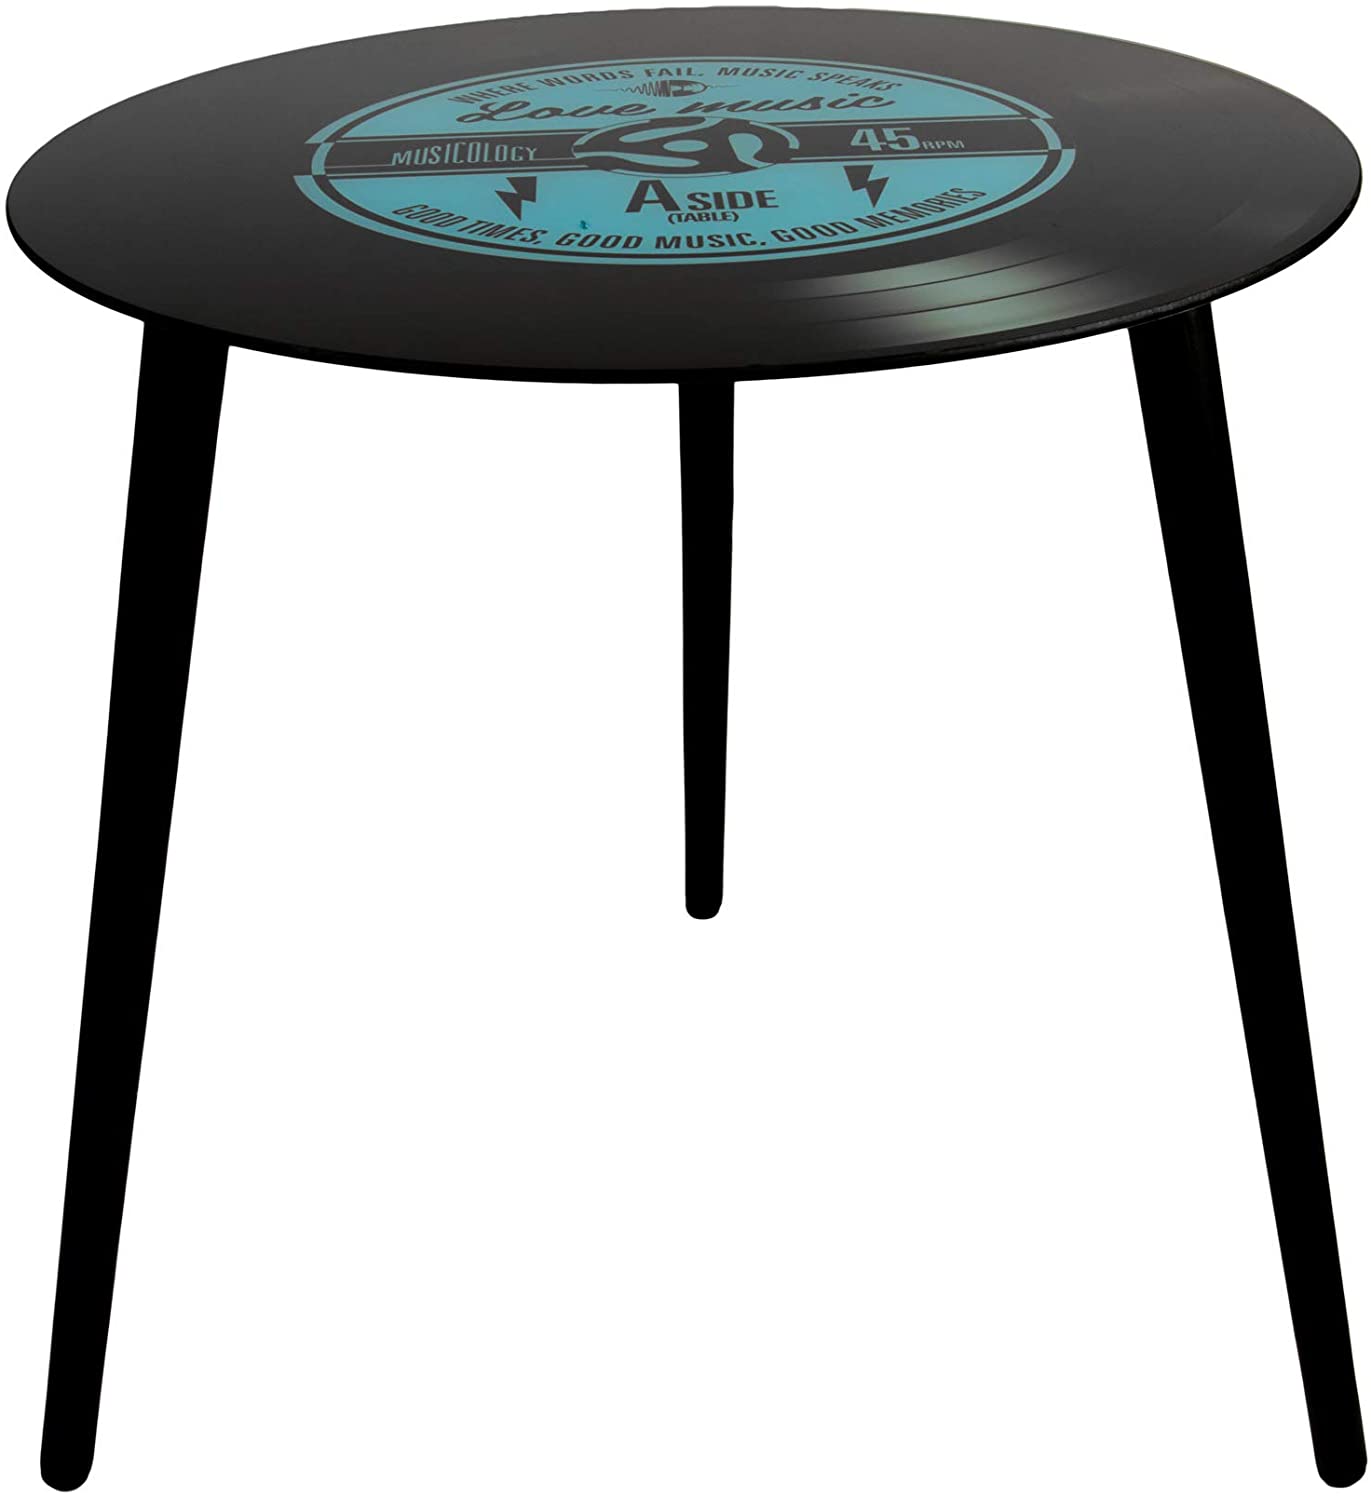 Vinyl Record Side Table